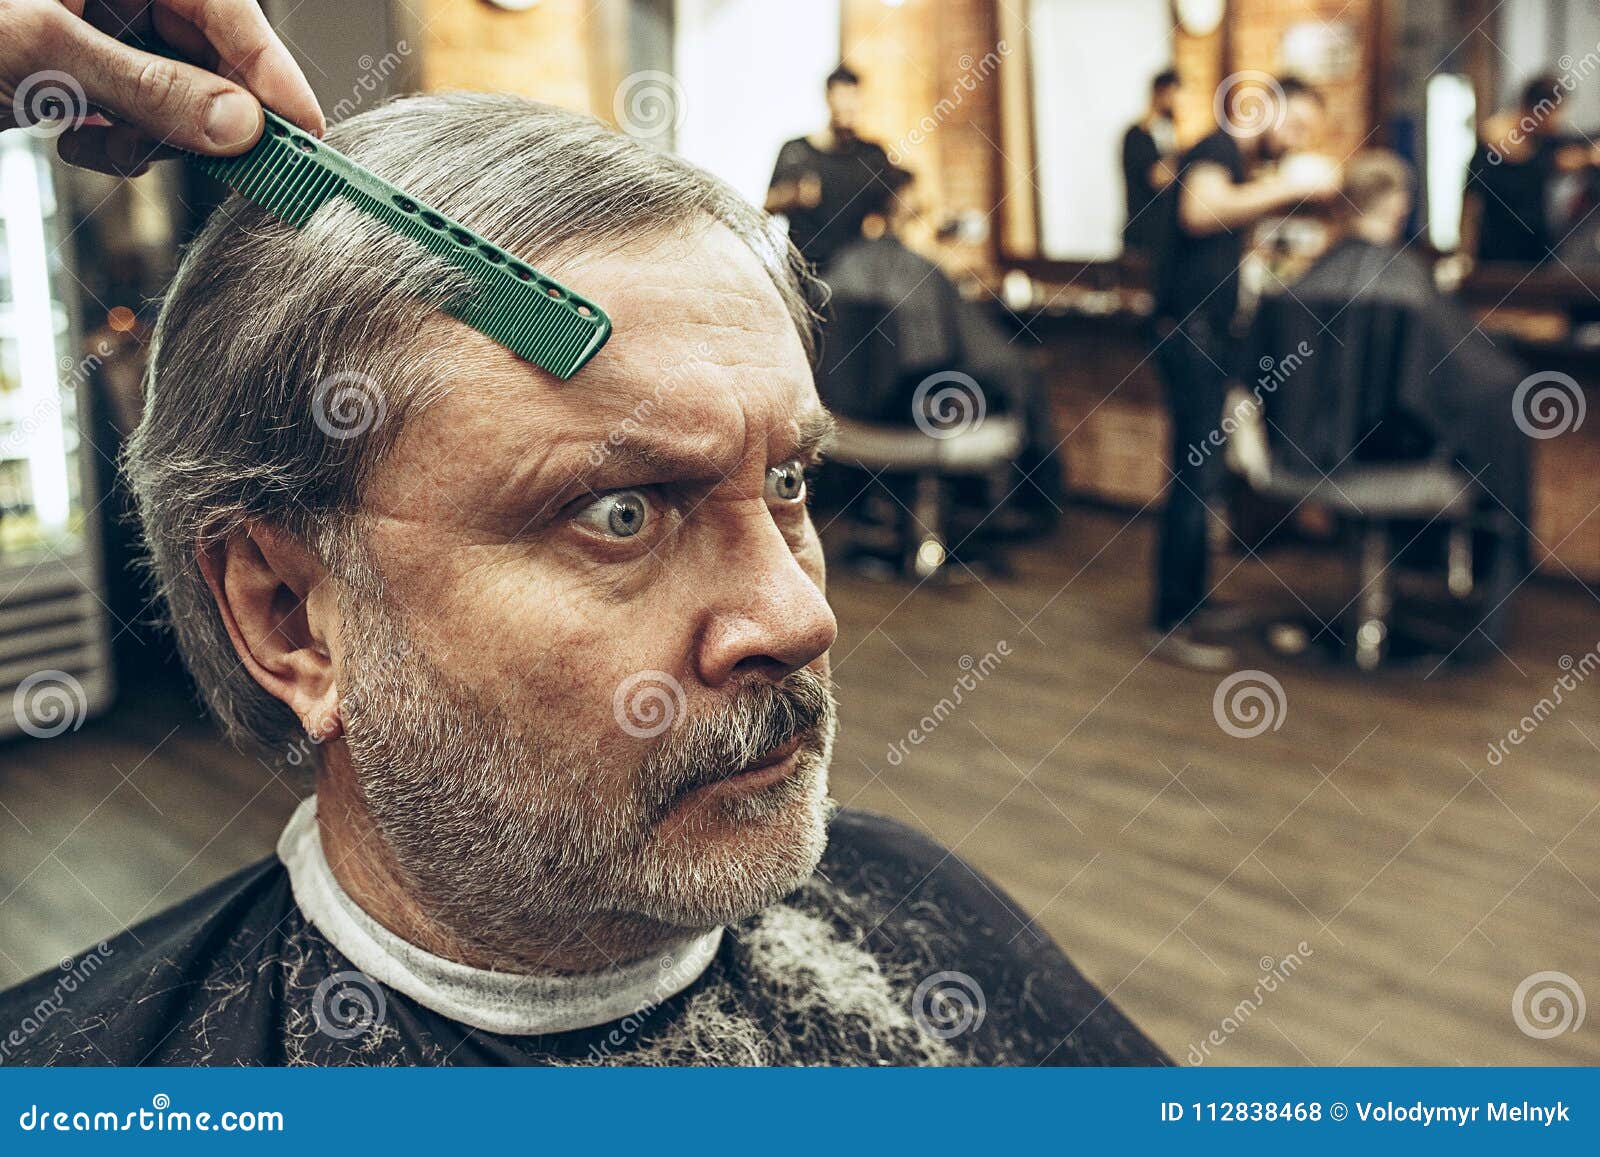 The Hands of Barber Making Haircut Attractive Old Man in Barbershop Stock  Photo - Image of beautiful, care: 112838468